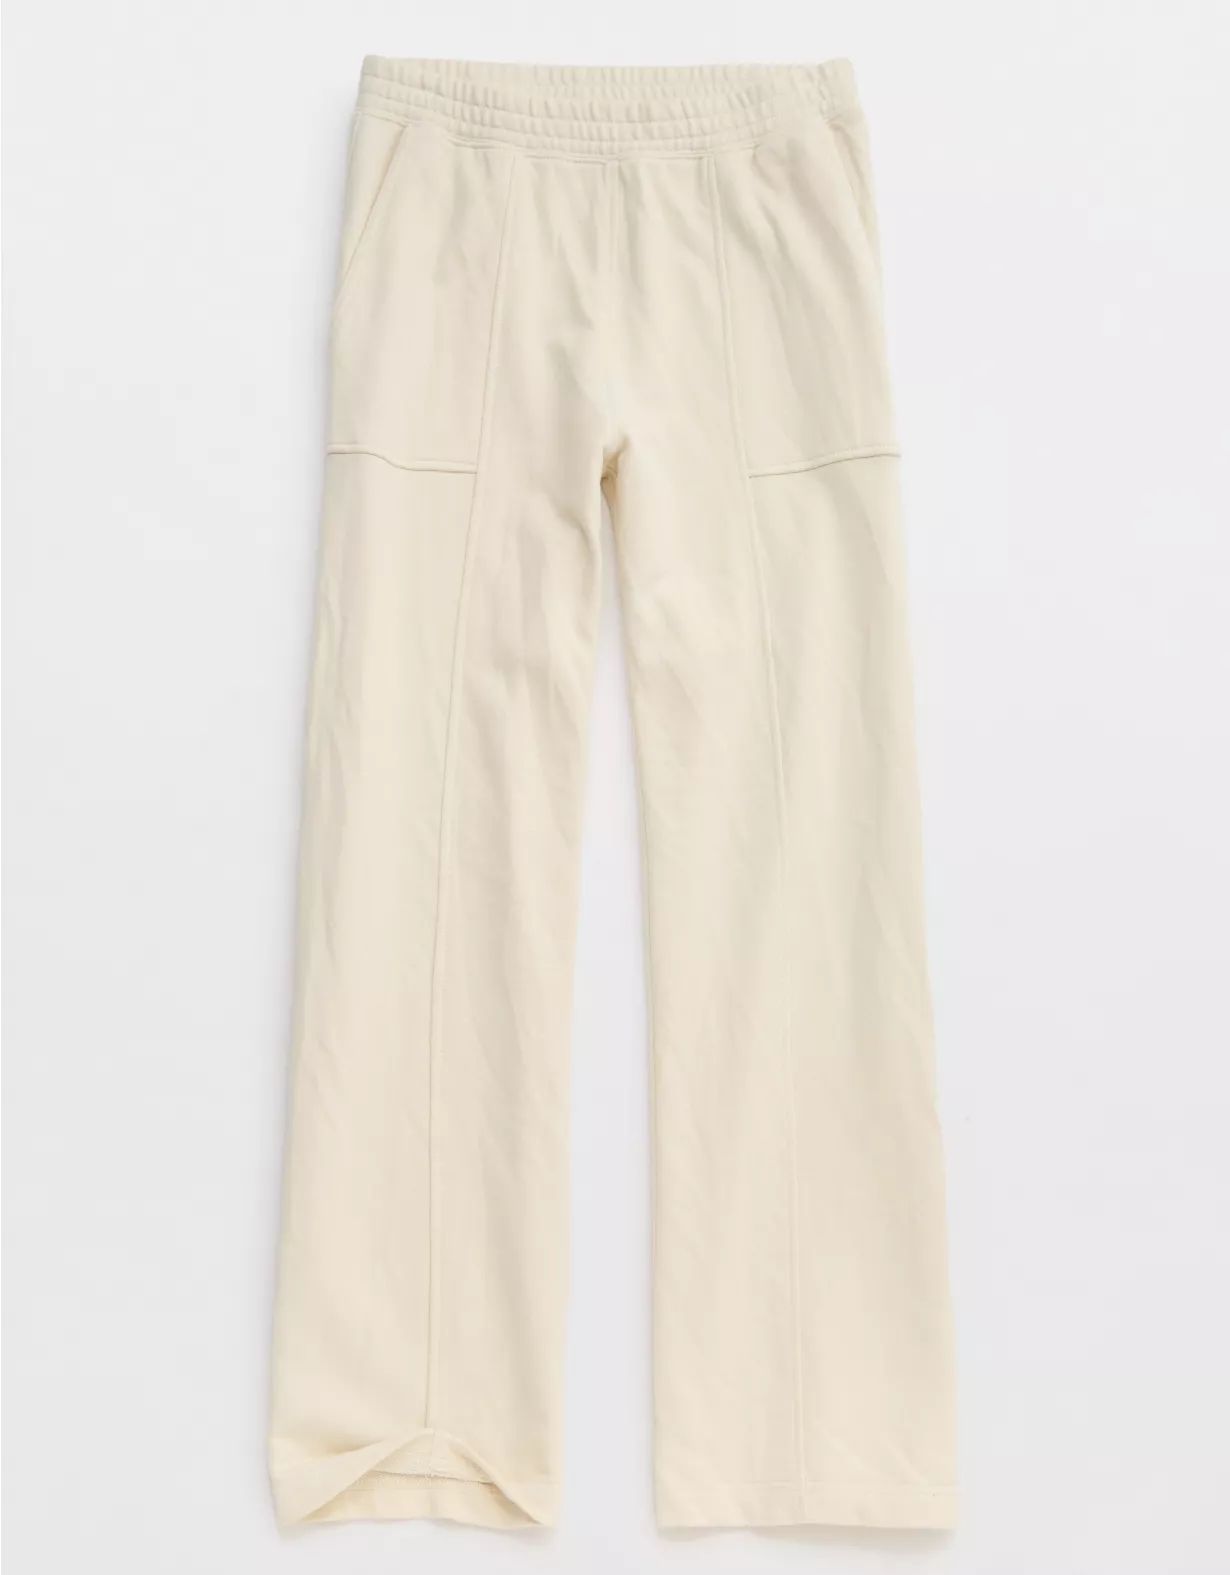 Aerie House Party Skater Pant | Aerie